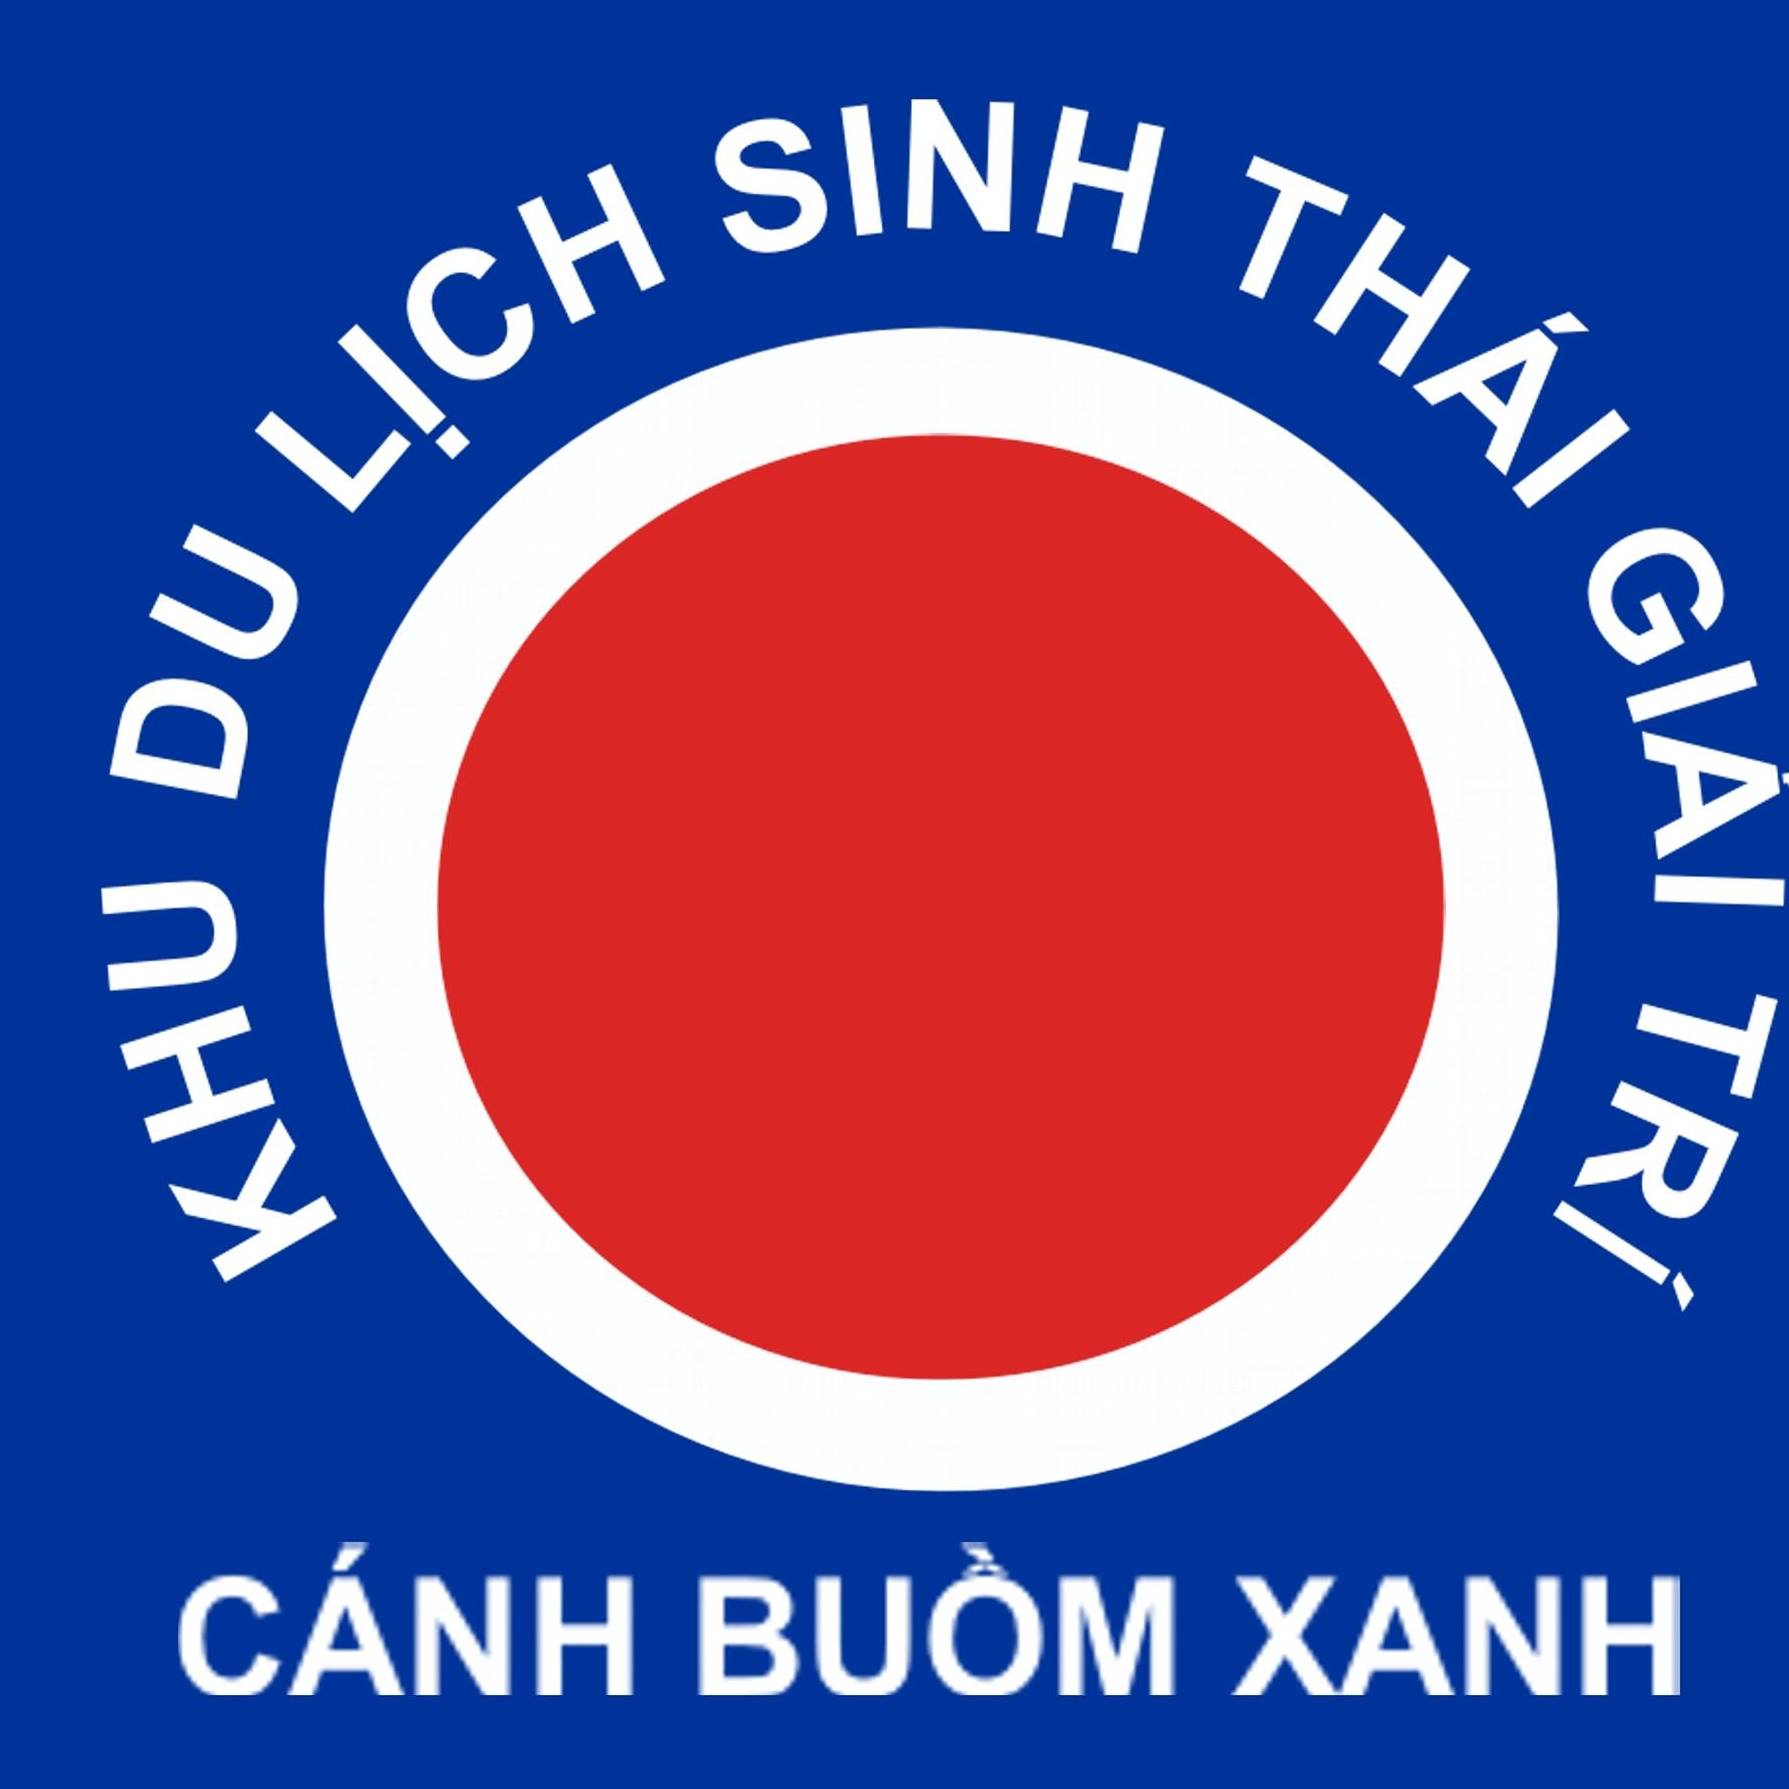 20.Canh Buom Xanh Sinh Thai